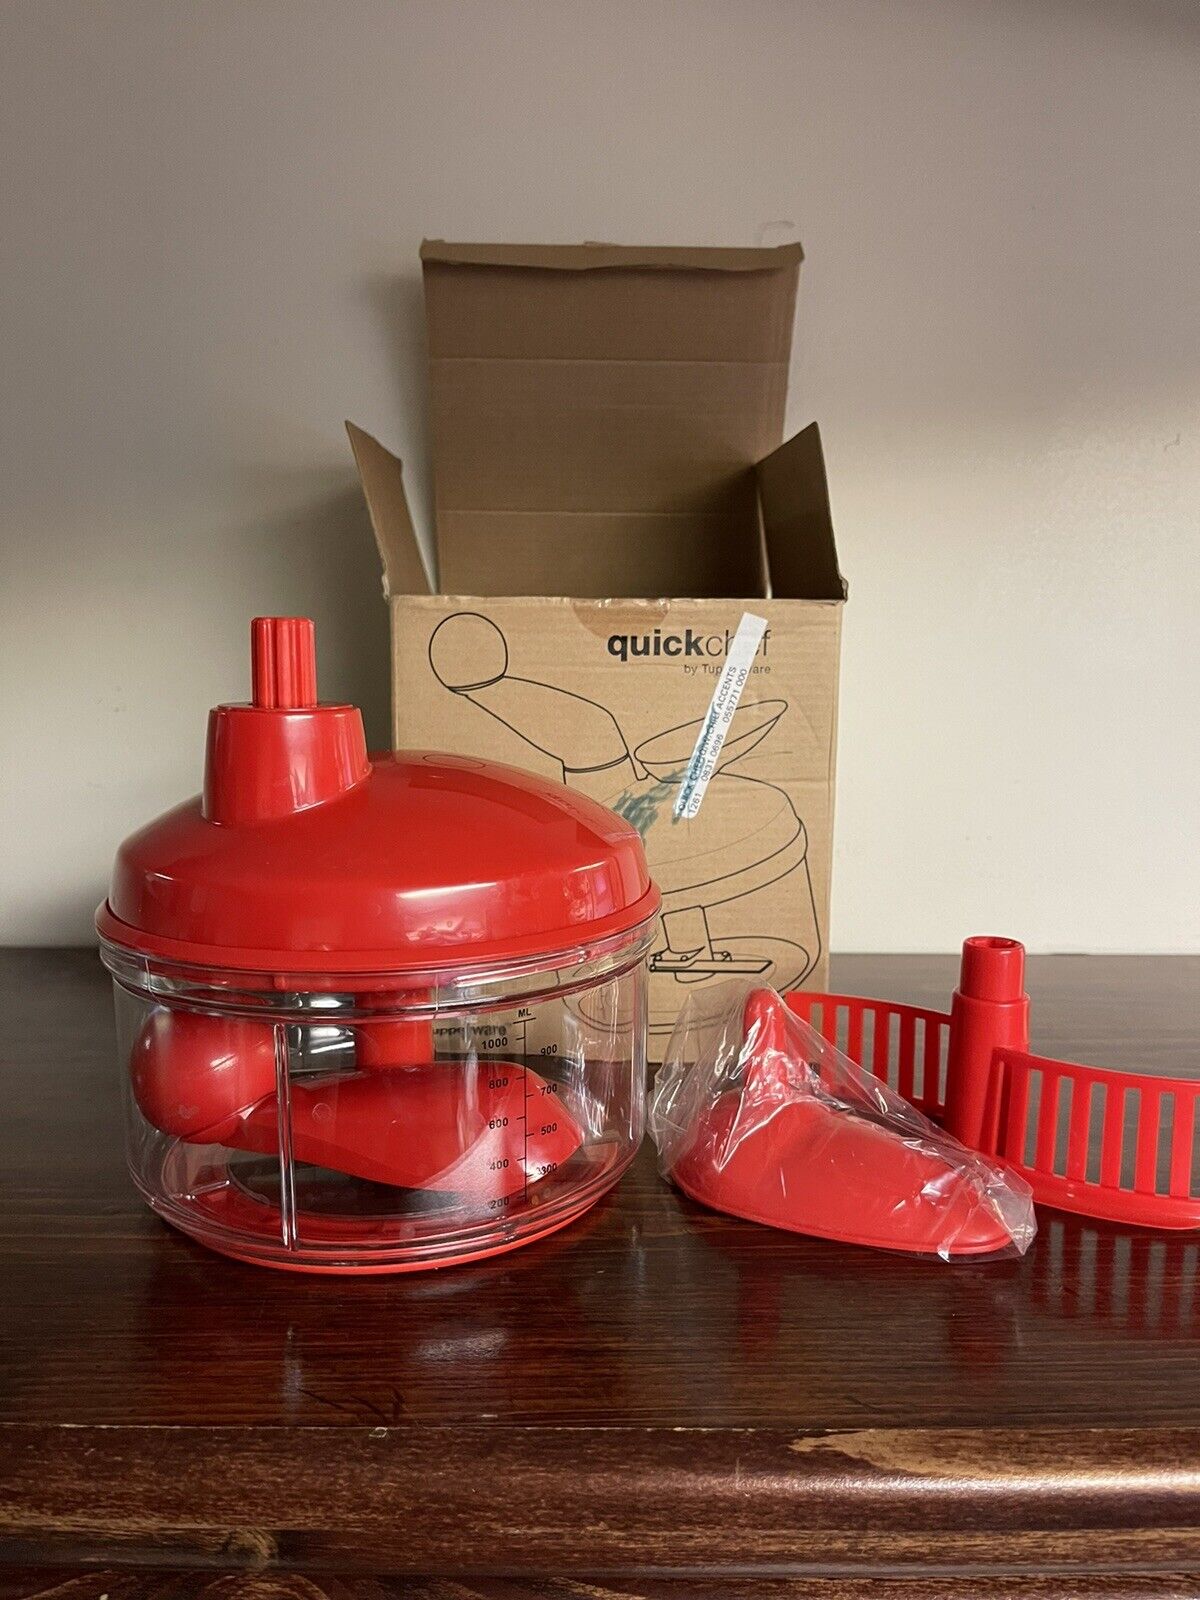 TUPPERWARE Quick Chef Food Processor Chopper Mixer Whisk Red 